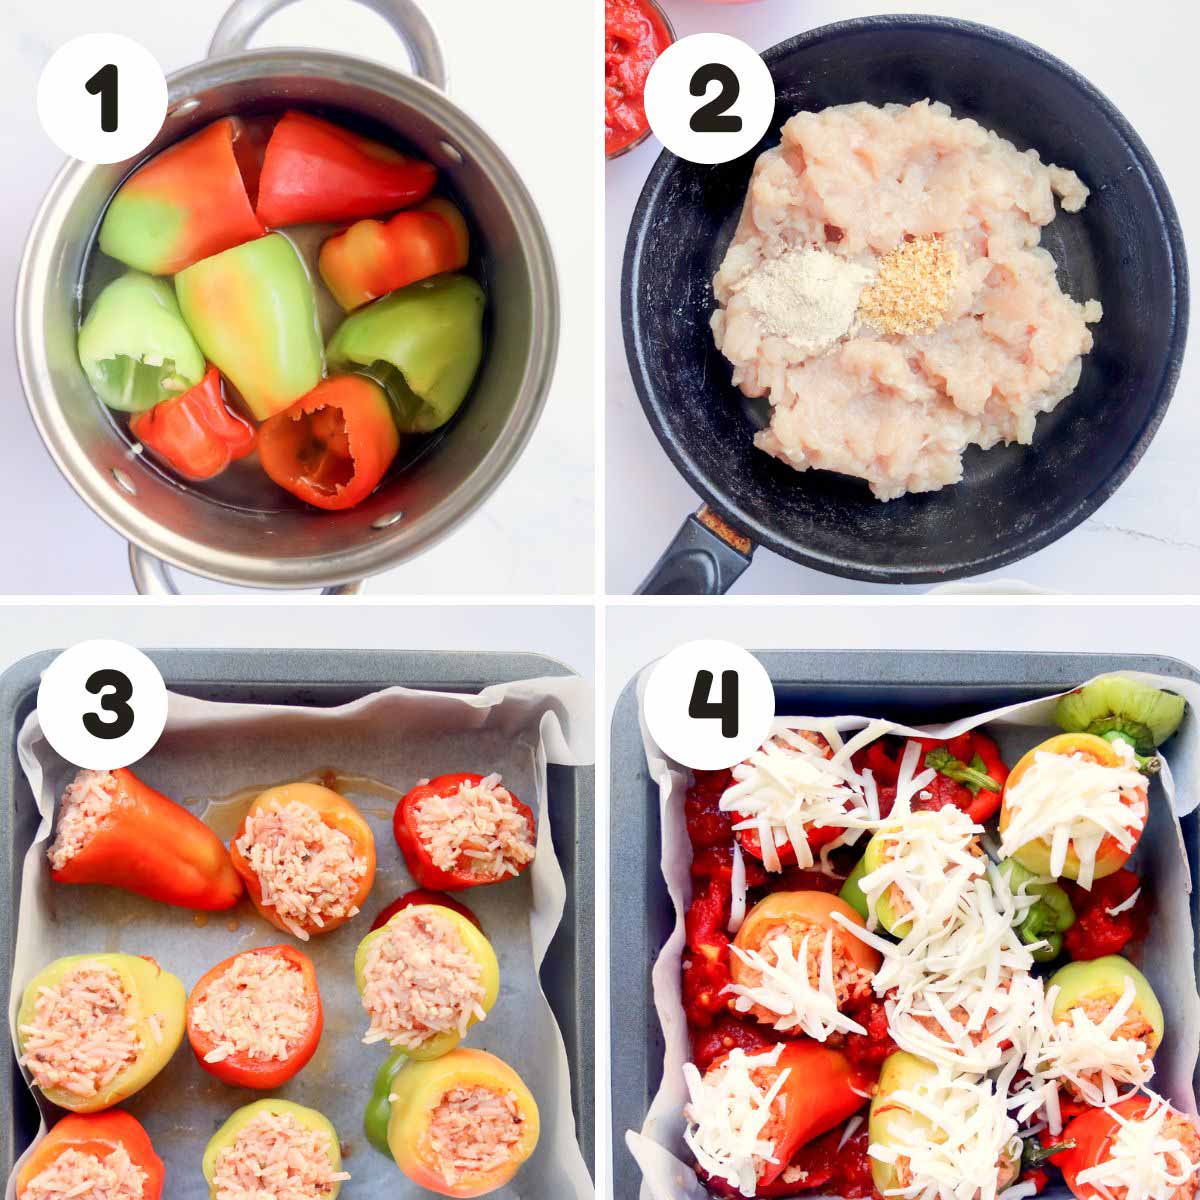 Steps to make the stuffed peppers.